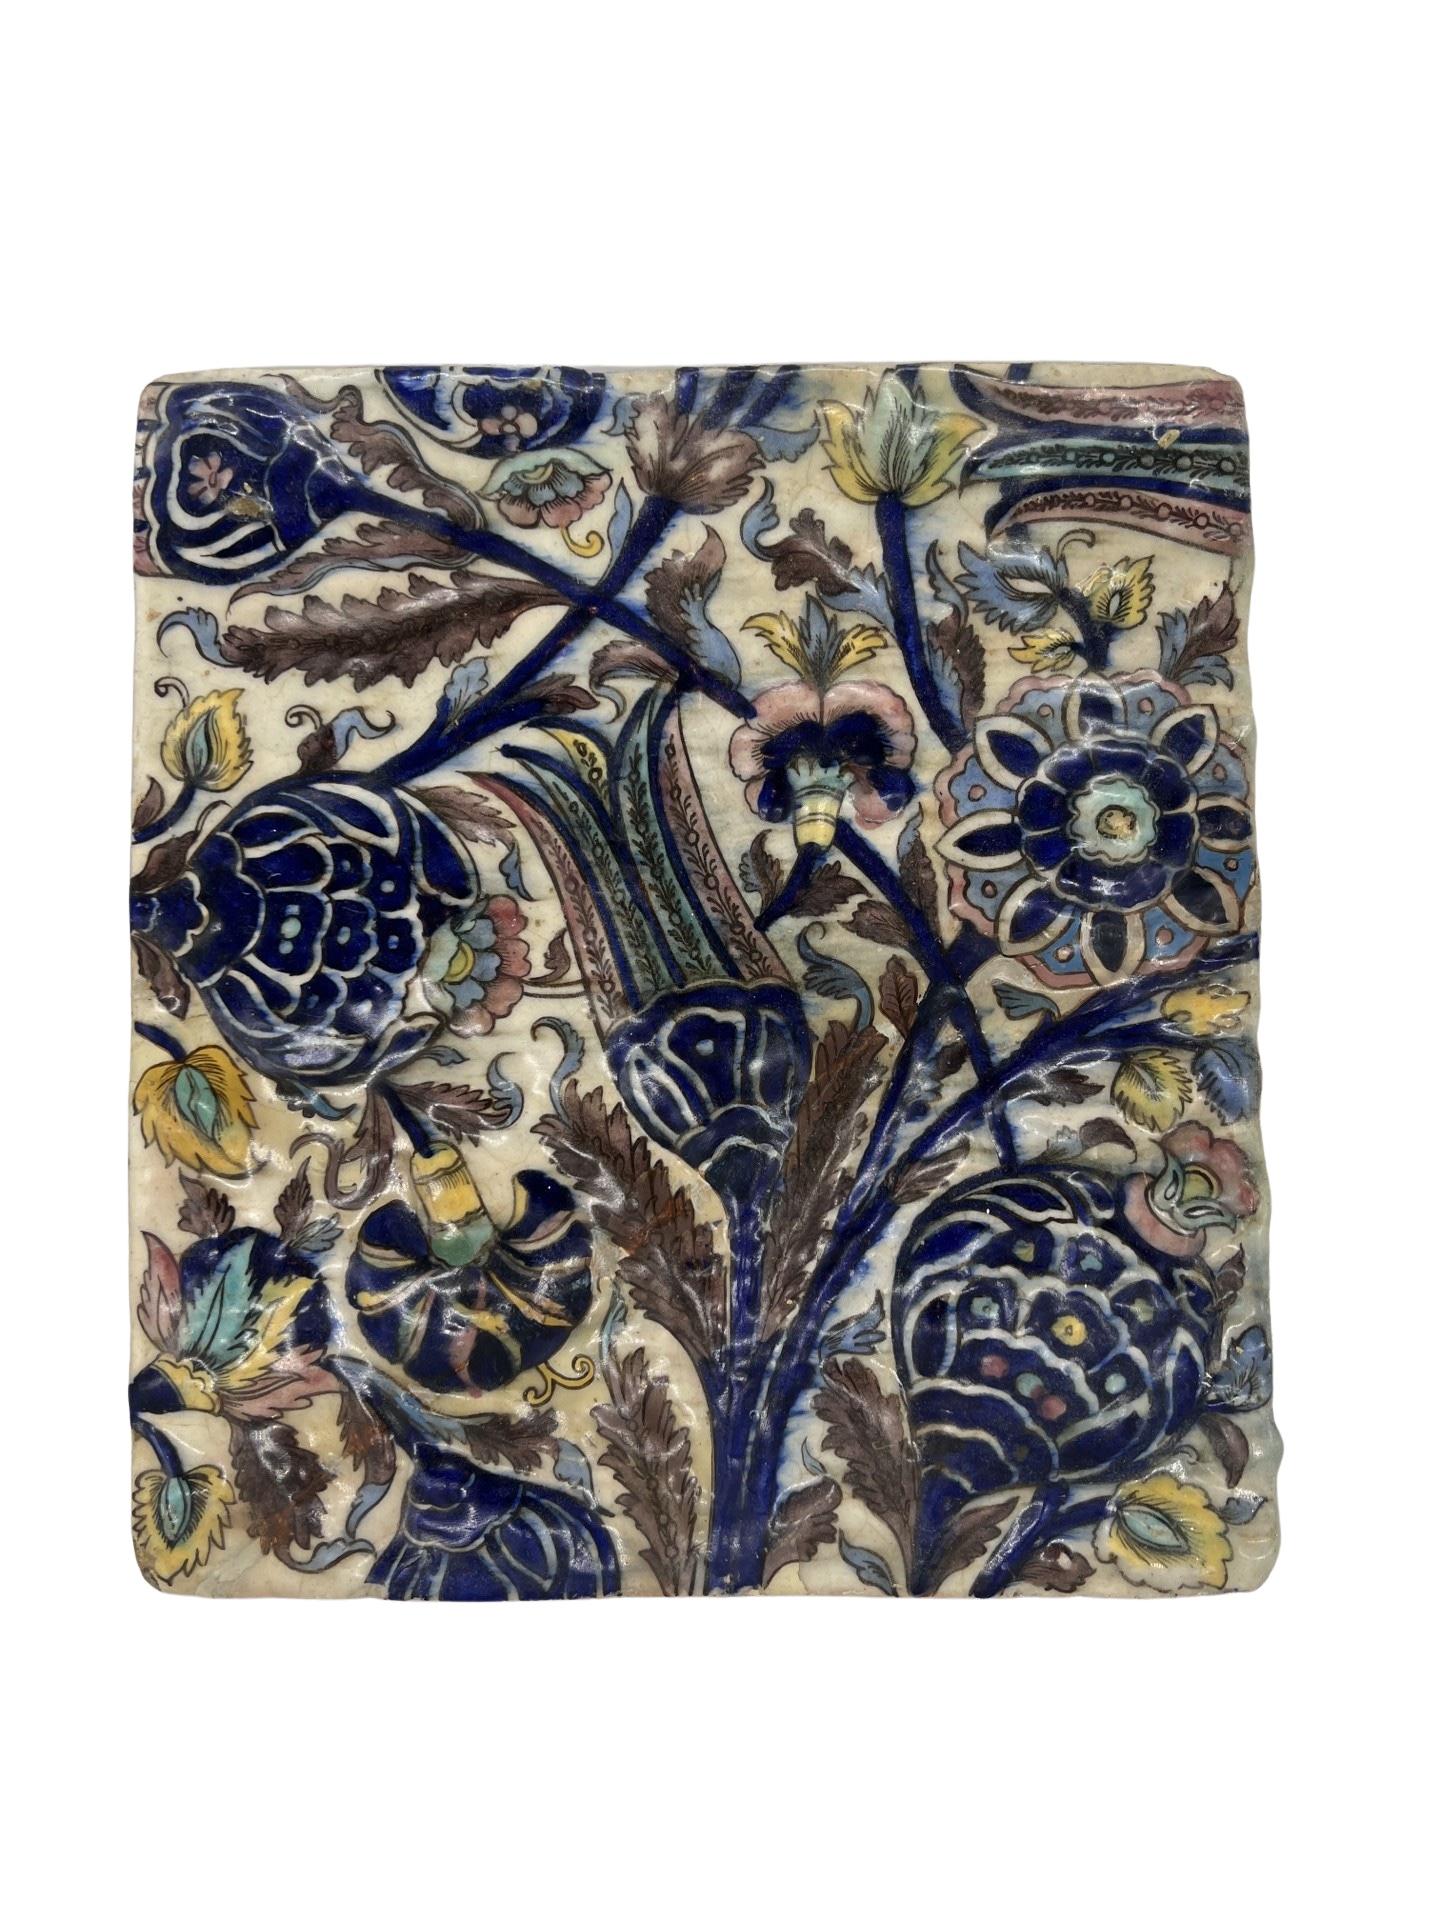 Persian, 18th century or earlier. 
<br>The tile features a tin glaze faience surface decorated with floral and foliate motifs. 
<br>Unmarked.